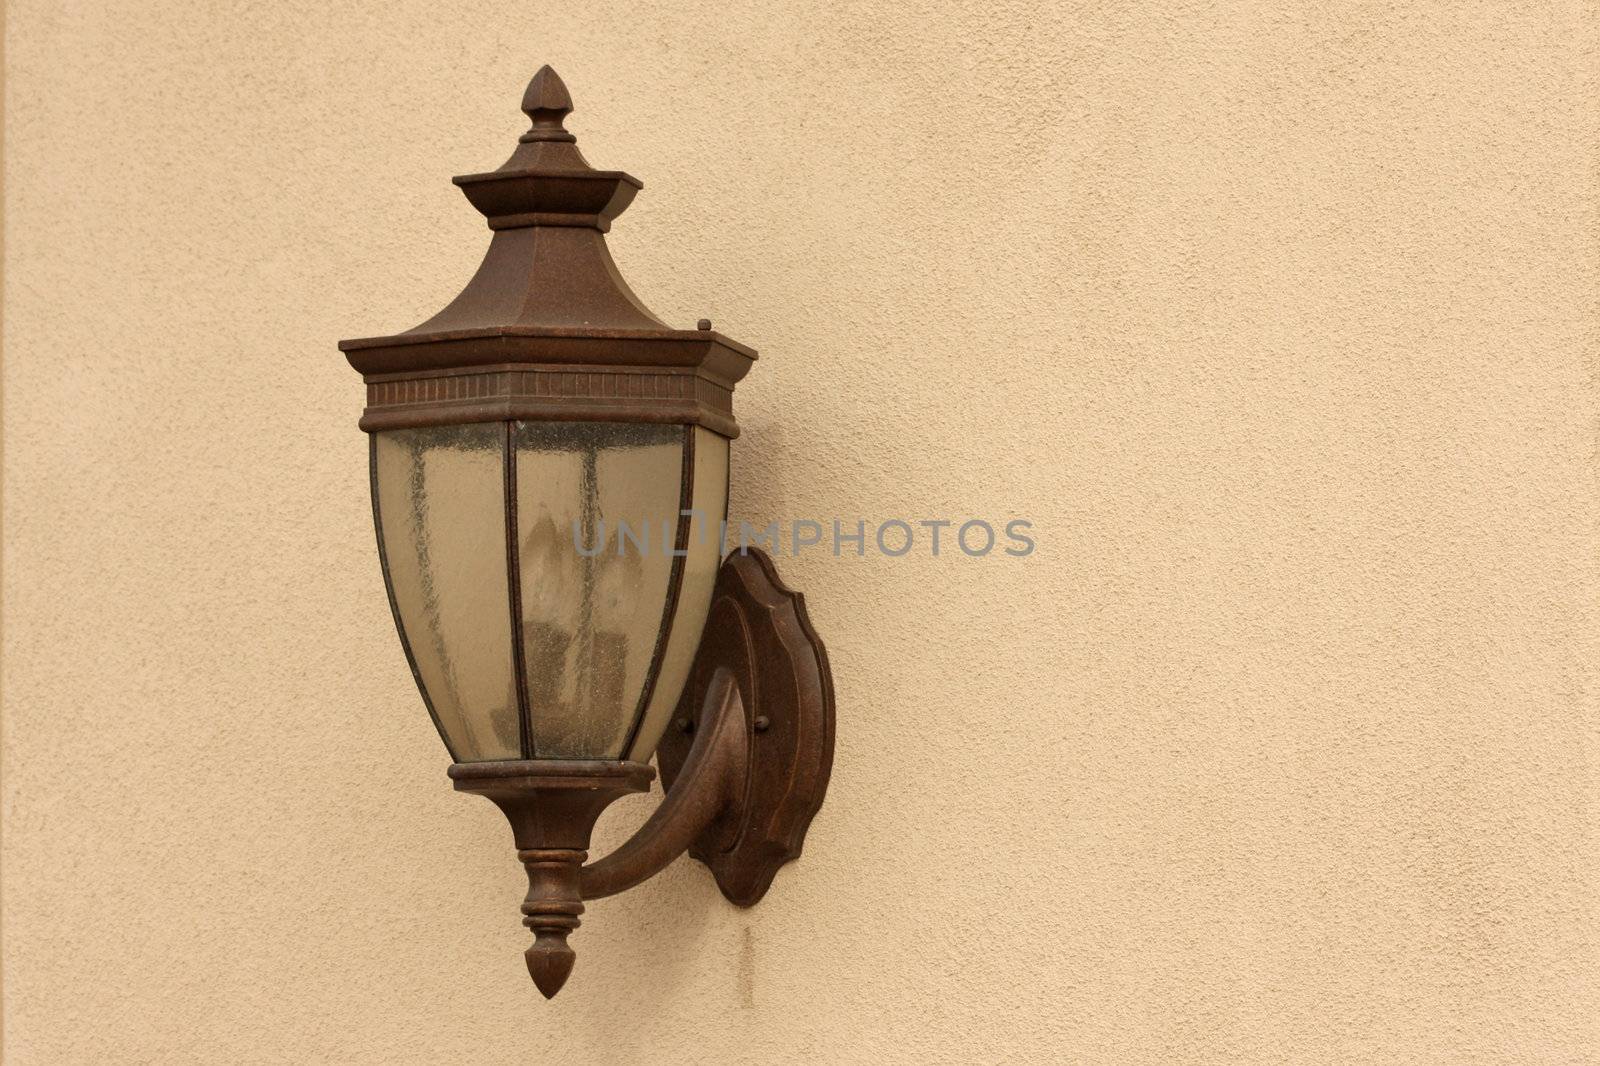 Beautiful Wall Lamp on Stucco Wall
 by Feverpitched